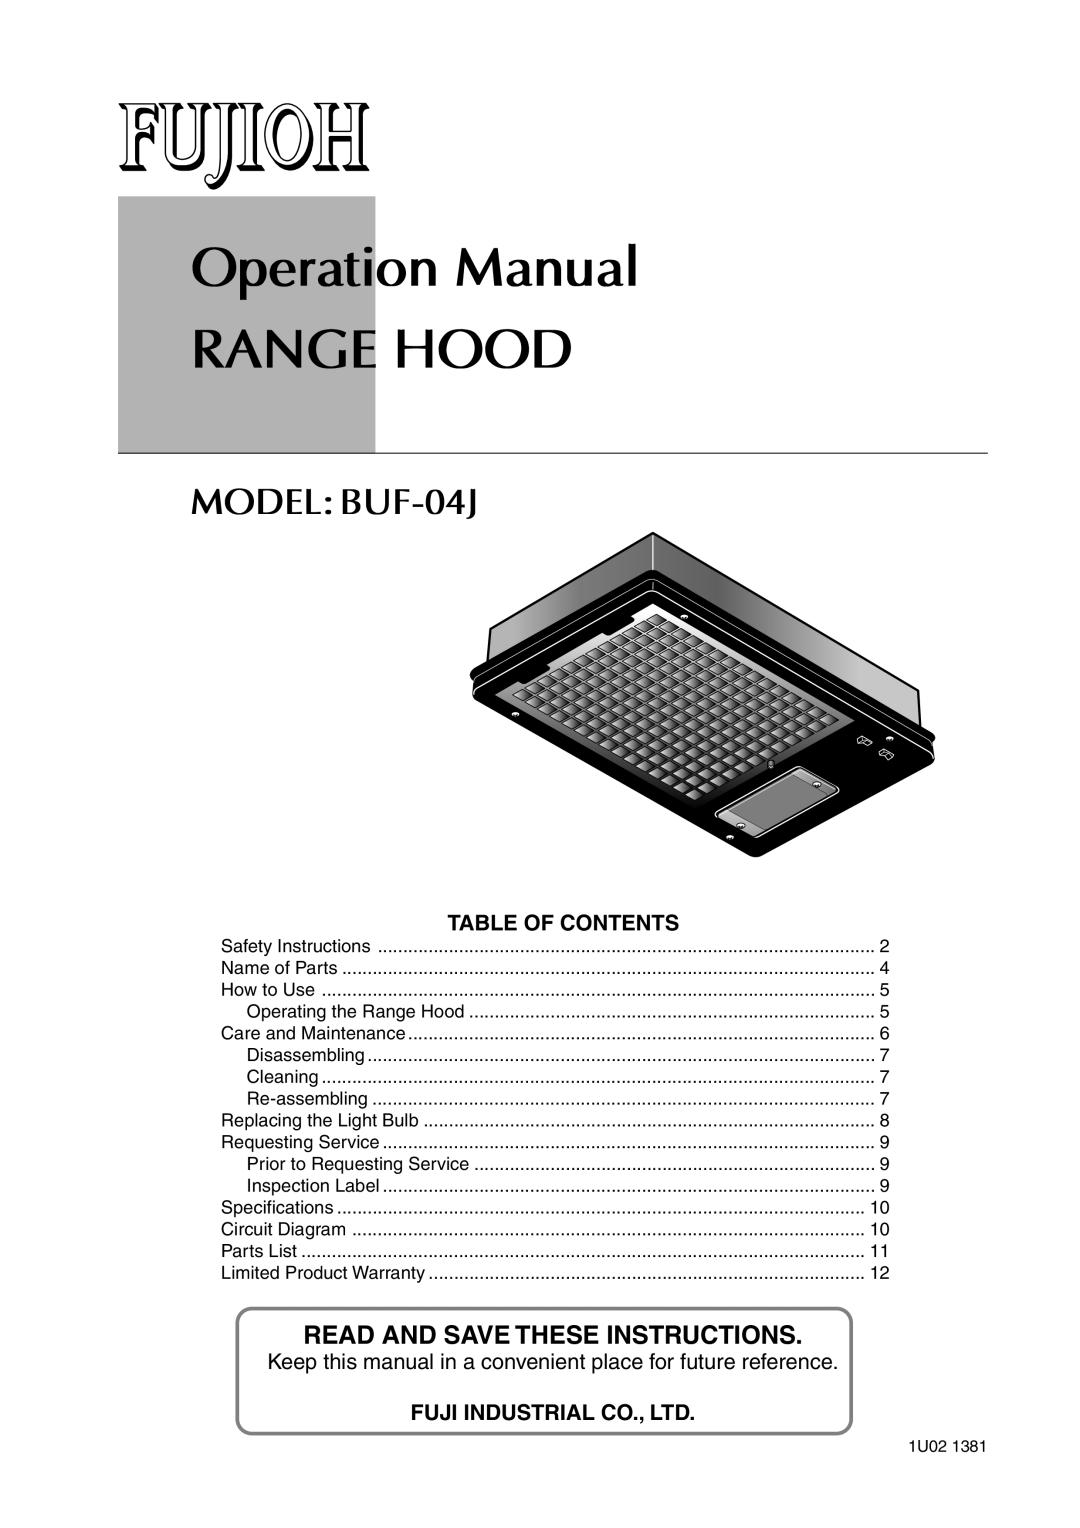 Fujioh operation manual MODEL BUF-04J, Table Of Contents, Read And Save These Instructions 